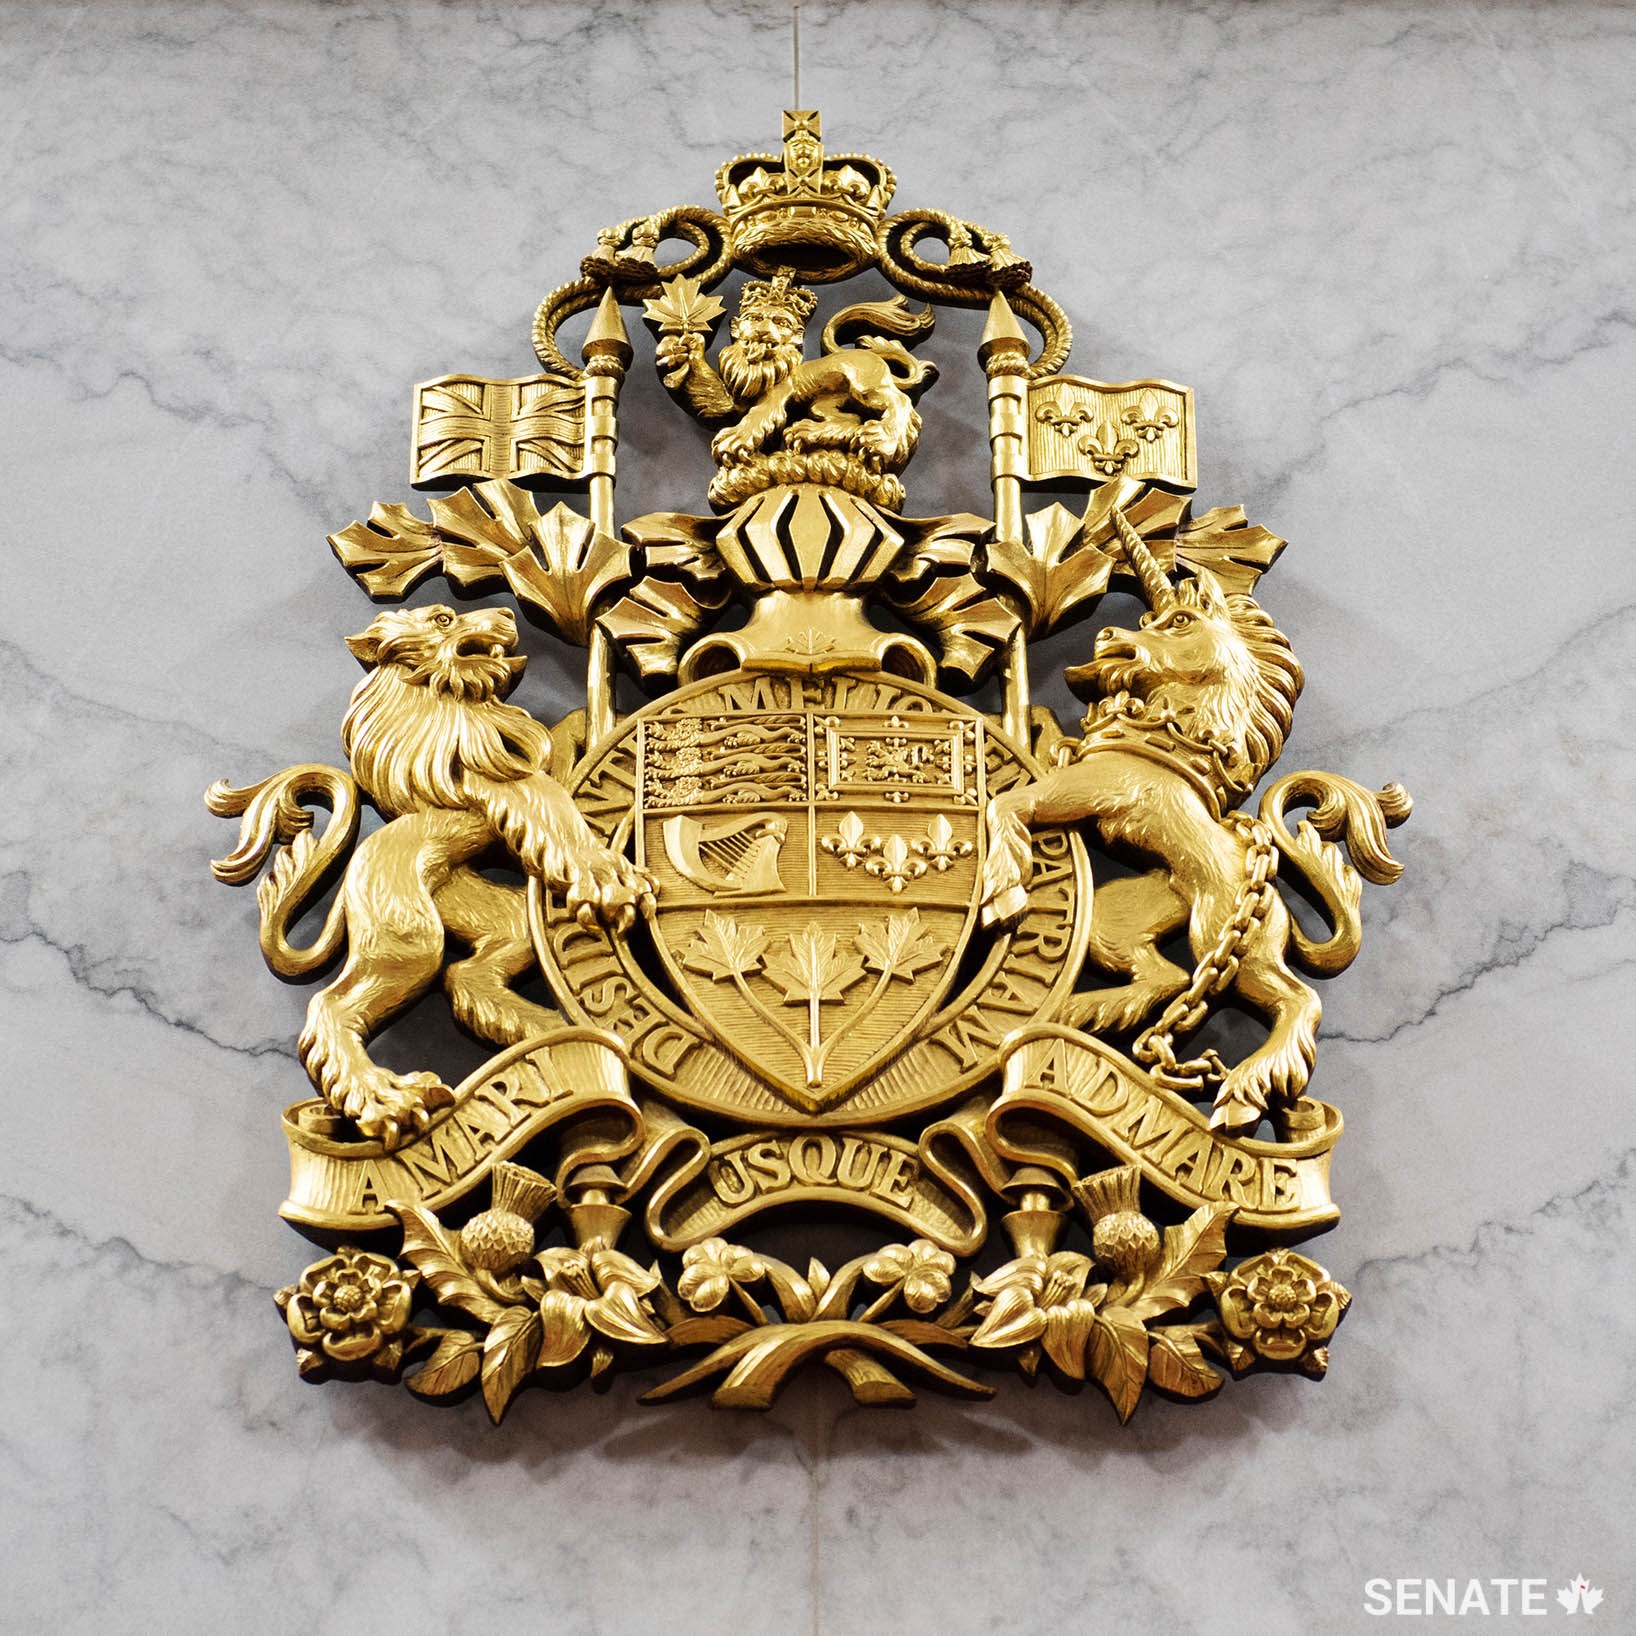 Dominion Sculptor Phil White’s metre-high carving of the current version of the Arms of Canada, approved by Queen Elizabeth II in 1994, includes a circlet bearing the motto of the Order of Canada.